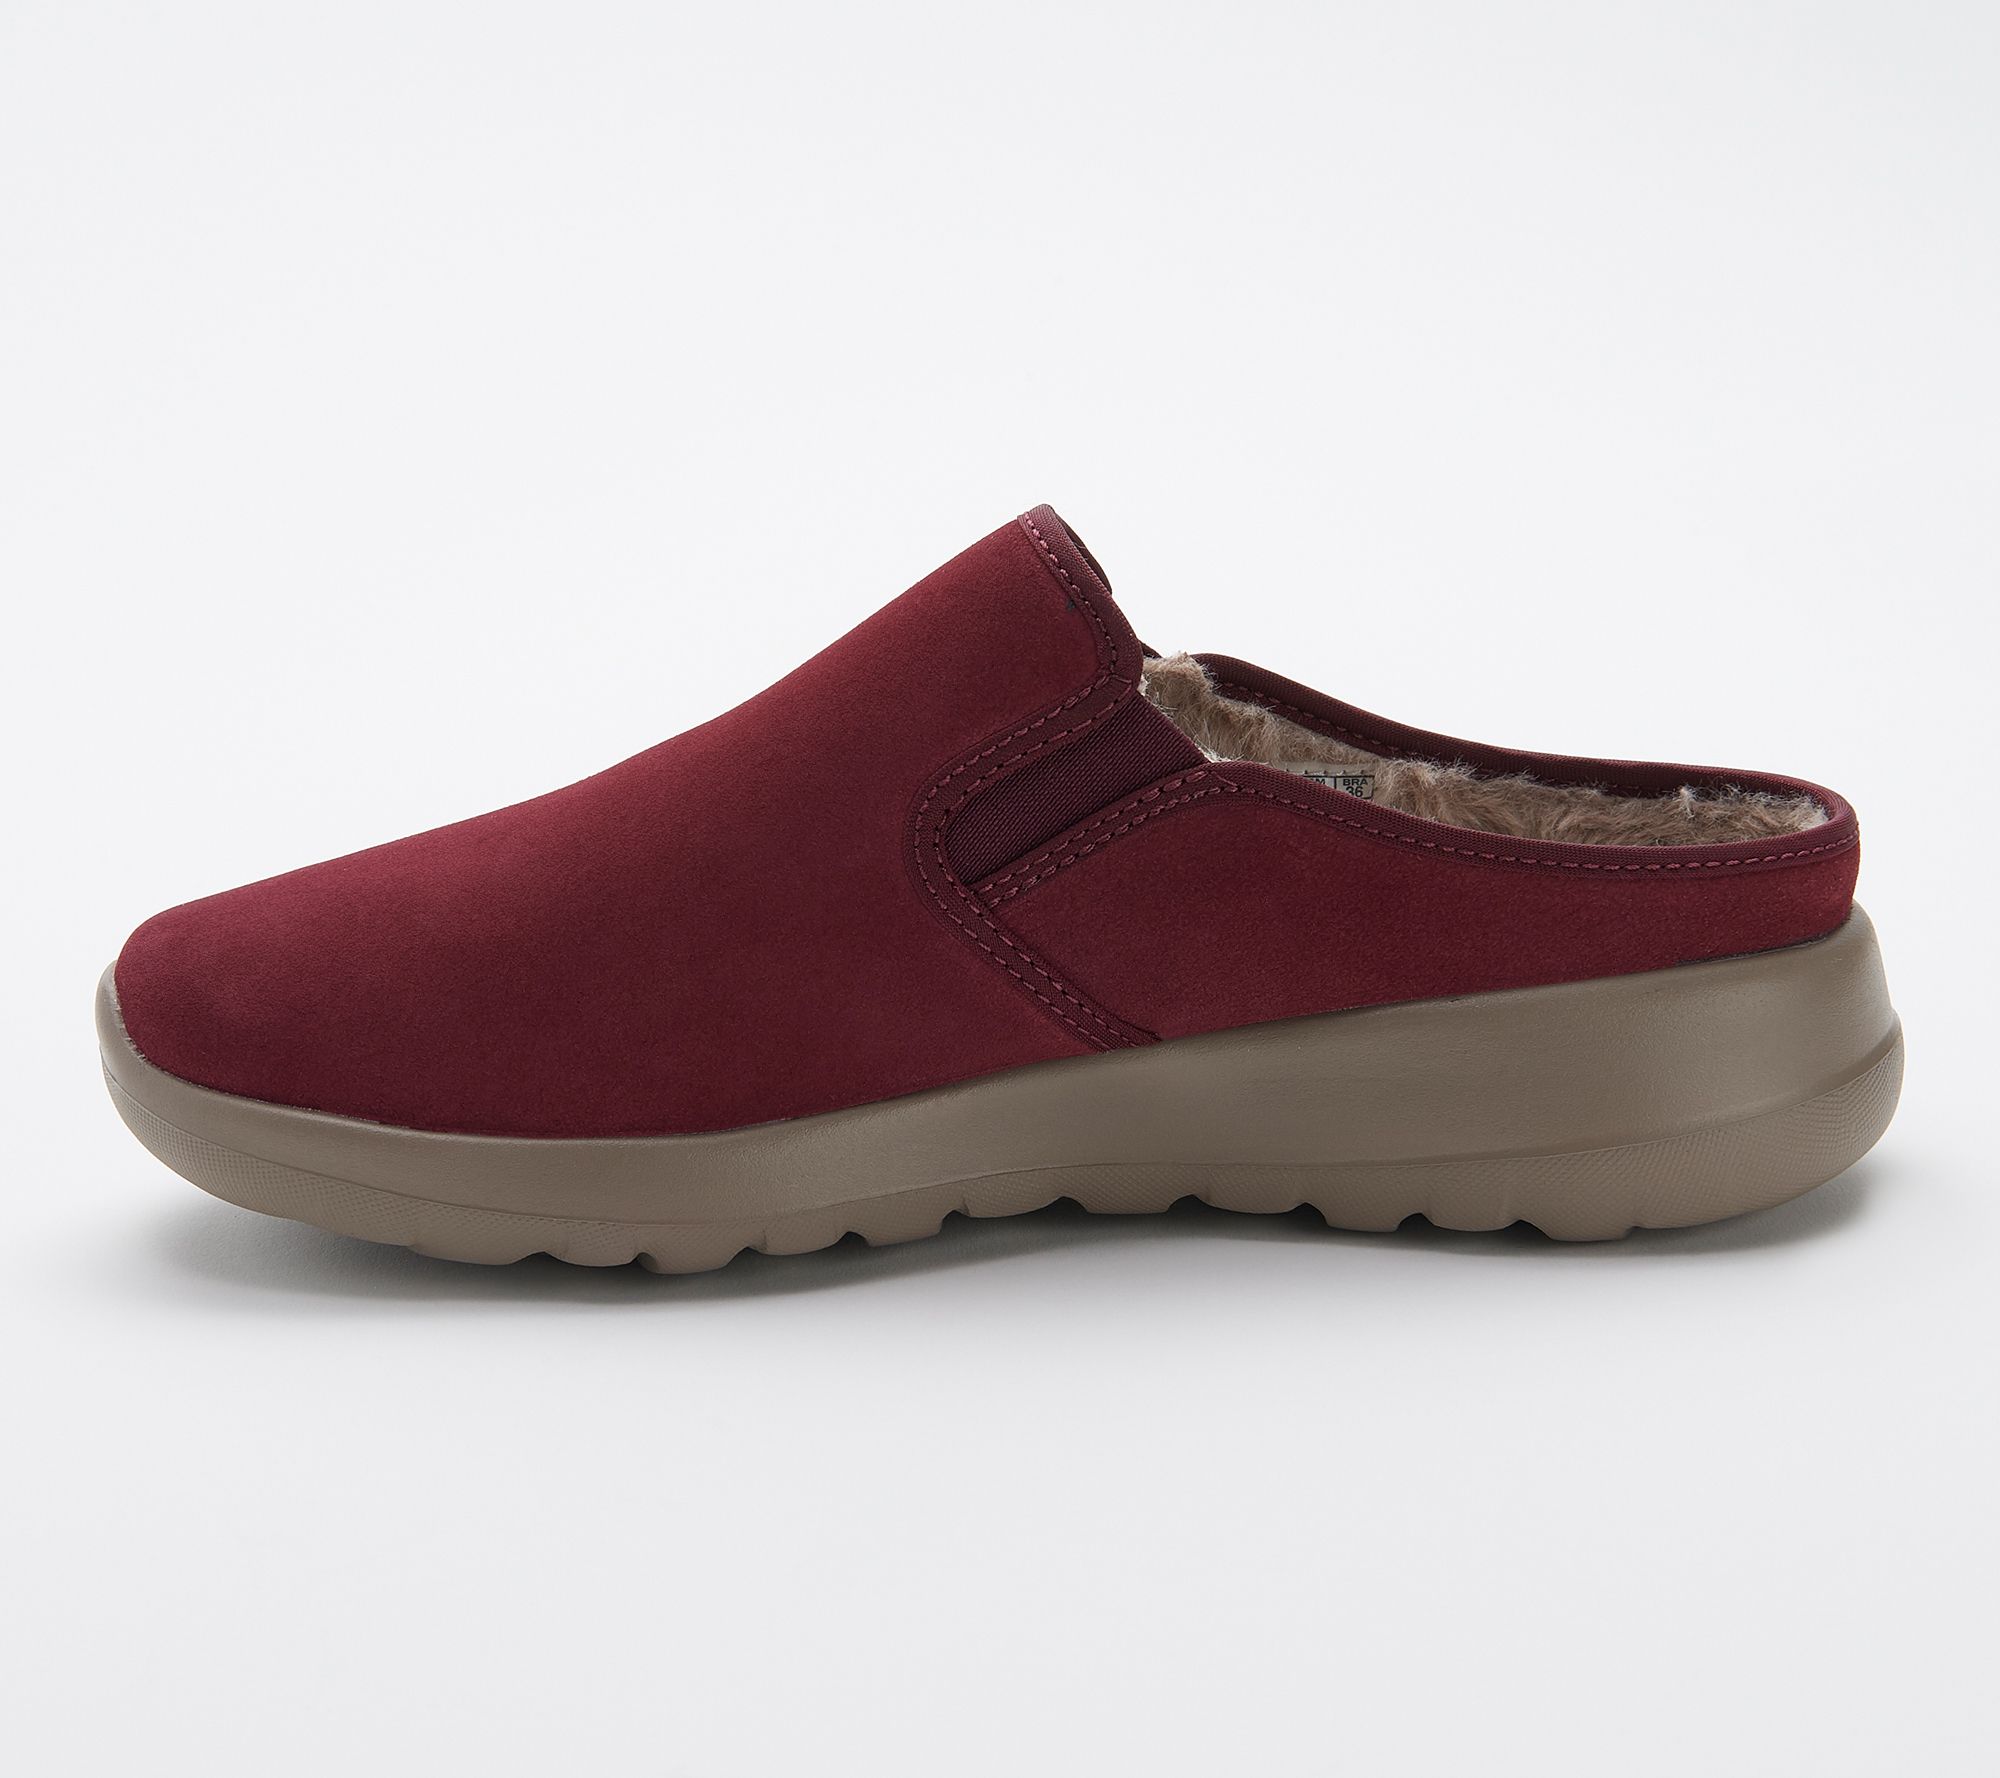 skechers on the go joy snuggly lined clog